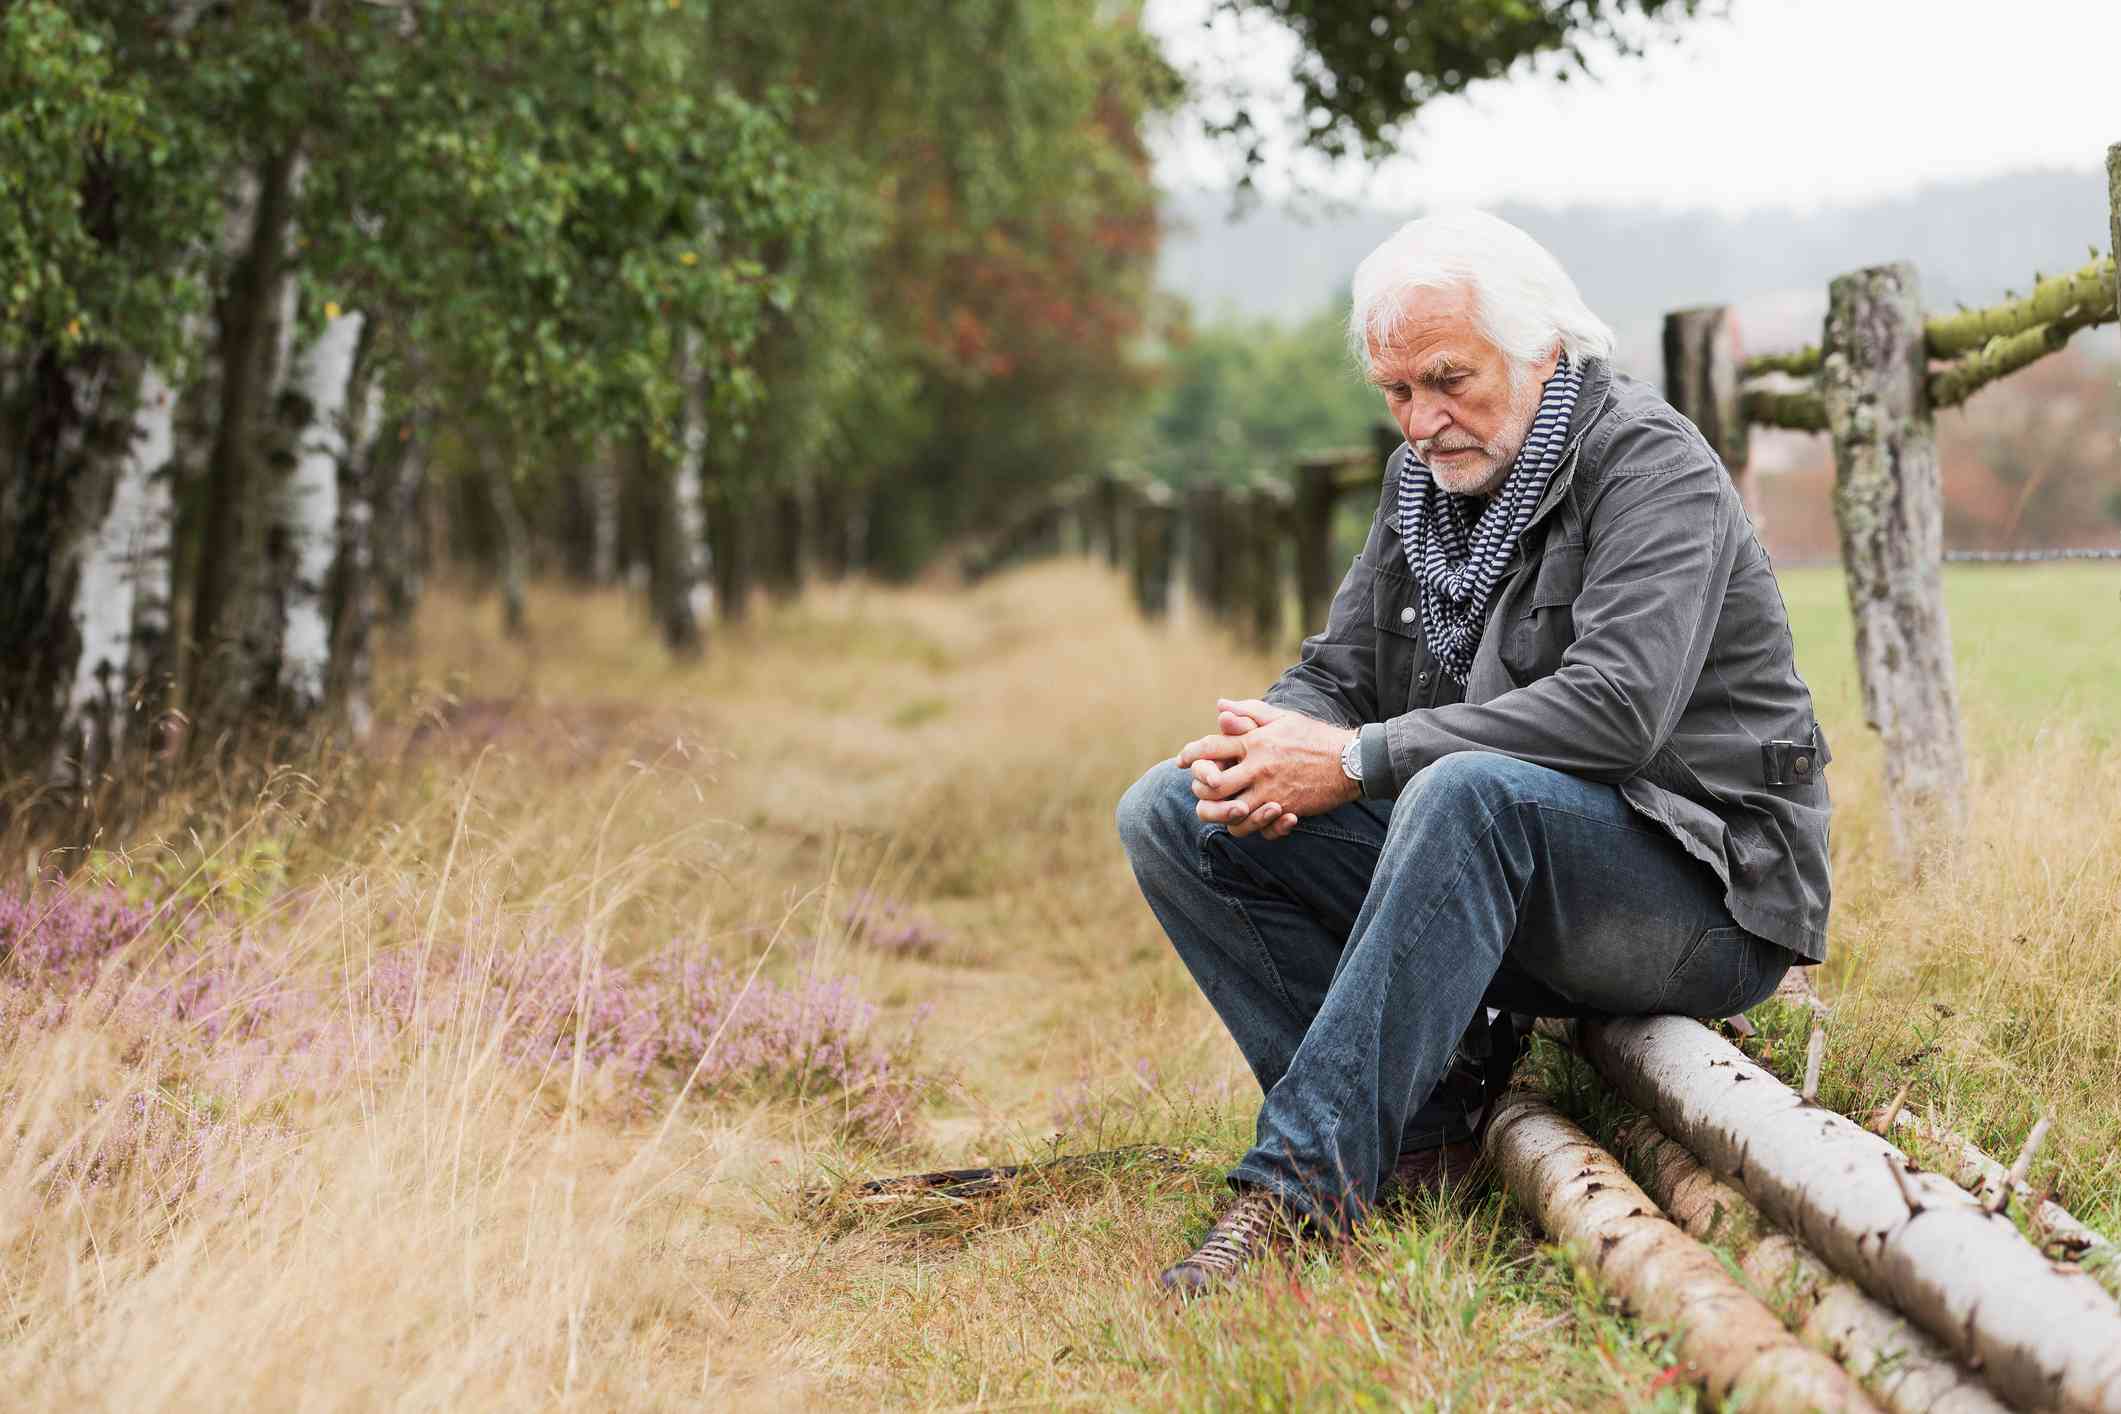 An elderly man sits on some fallen trees outside on a cloudy day with his hands clasped together deep in thought.